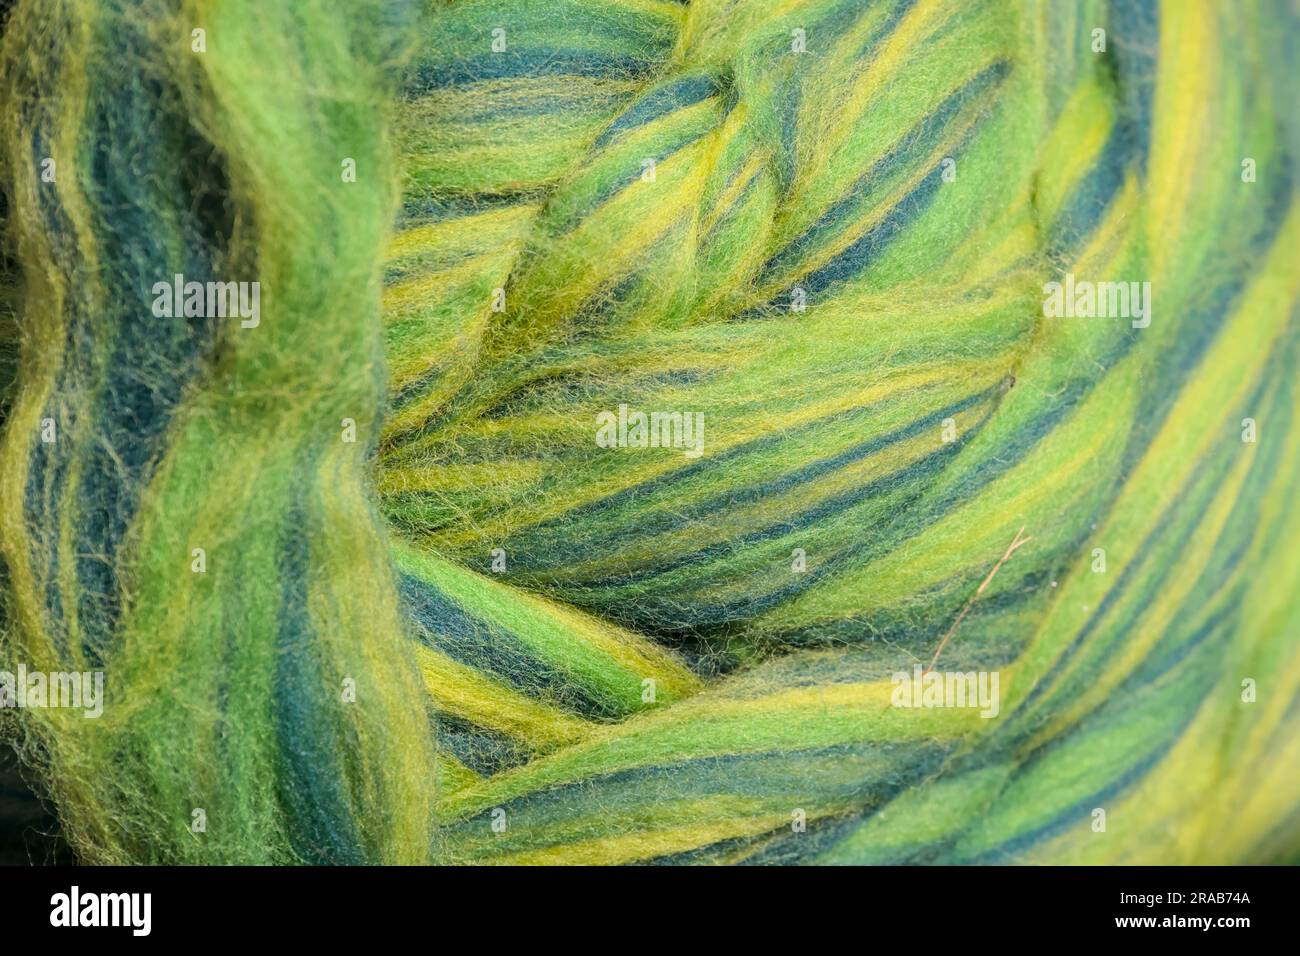 Multicolored strings of wool for felting and spinning as a background. Stock Photo